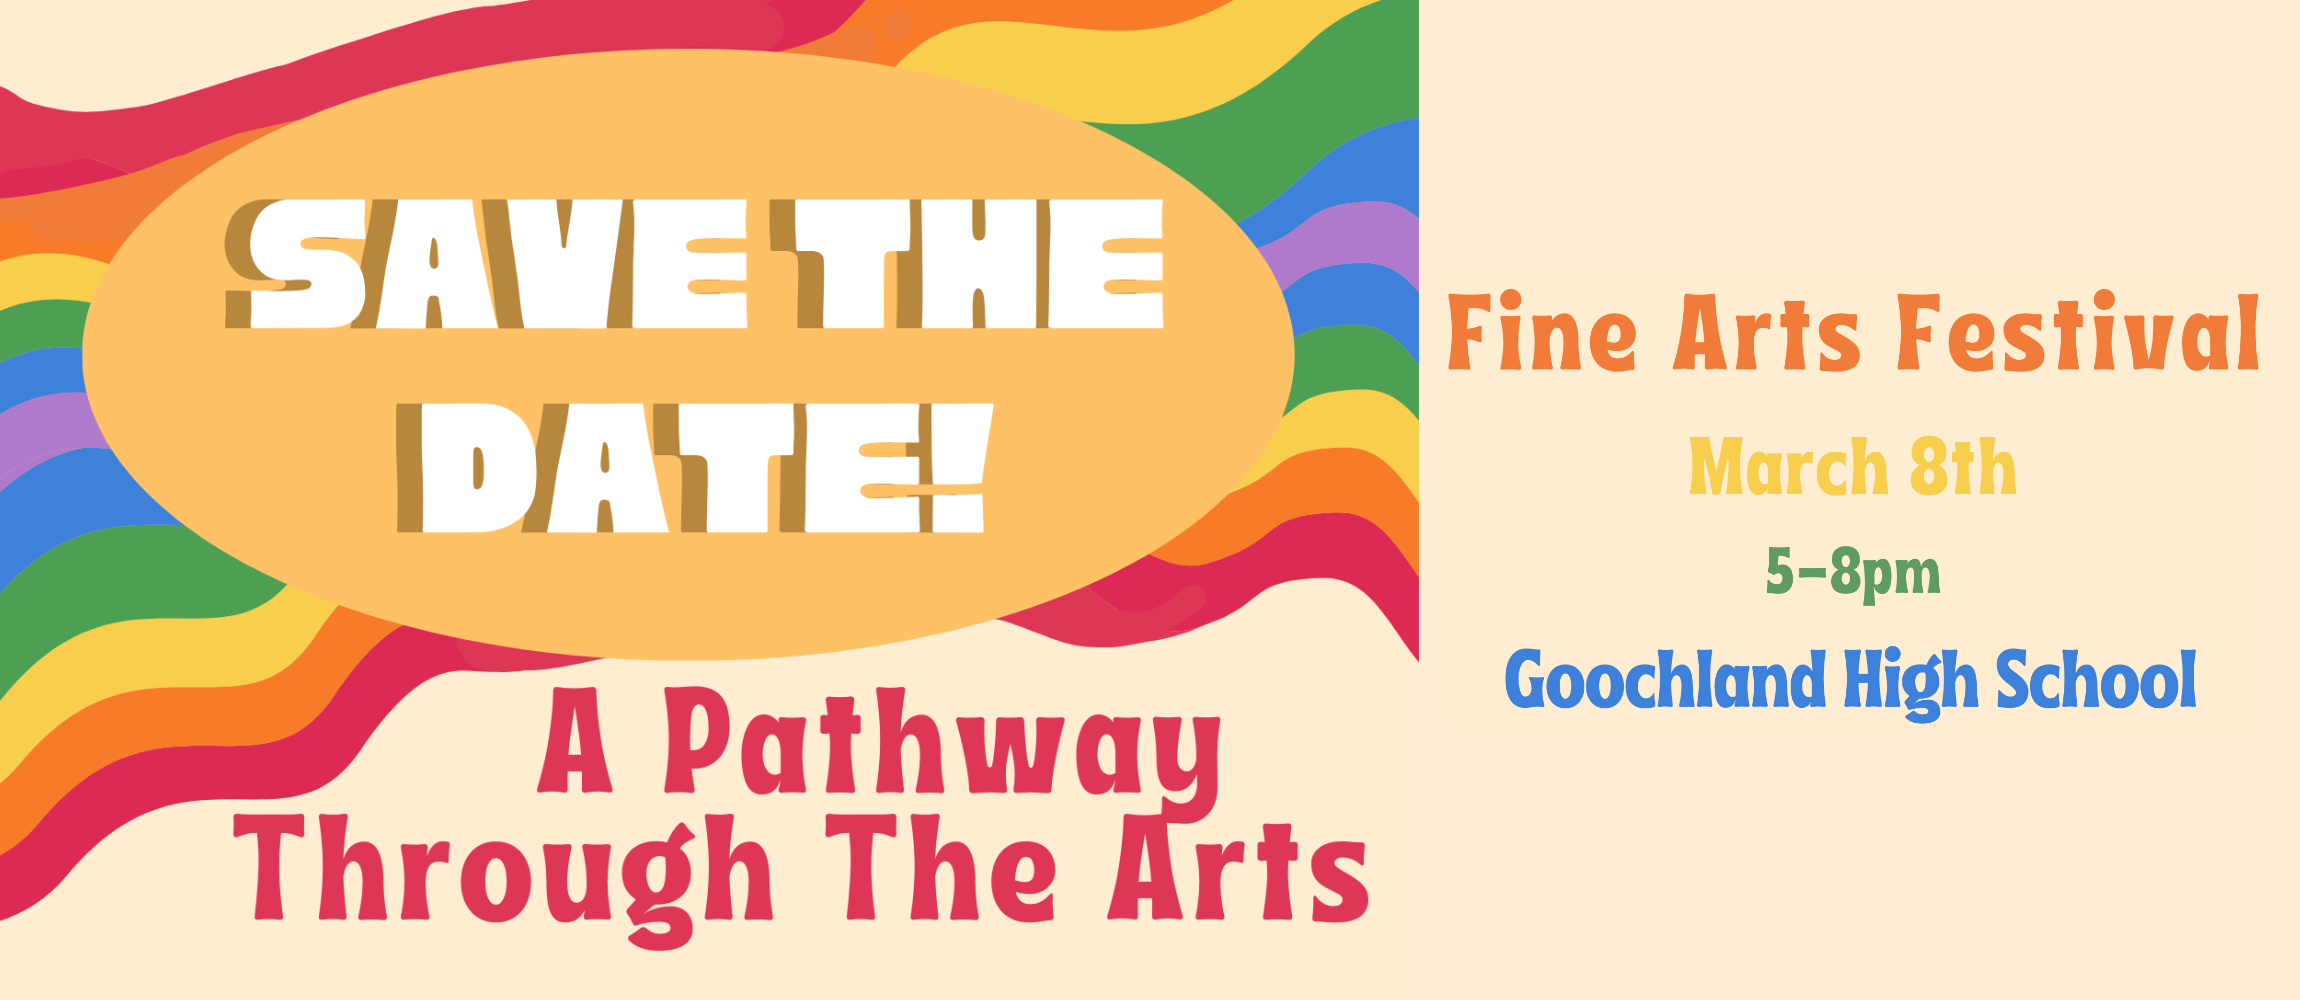 Save the date! A Pathway Through the Arts Fine Arts Festival March 8th 5-8pm Goochland High School